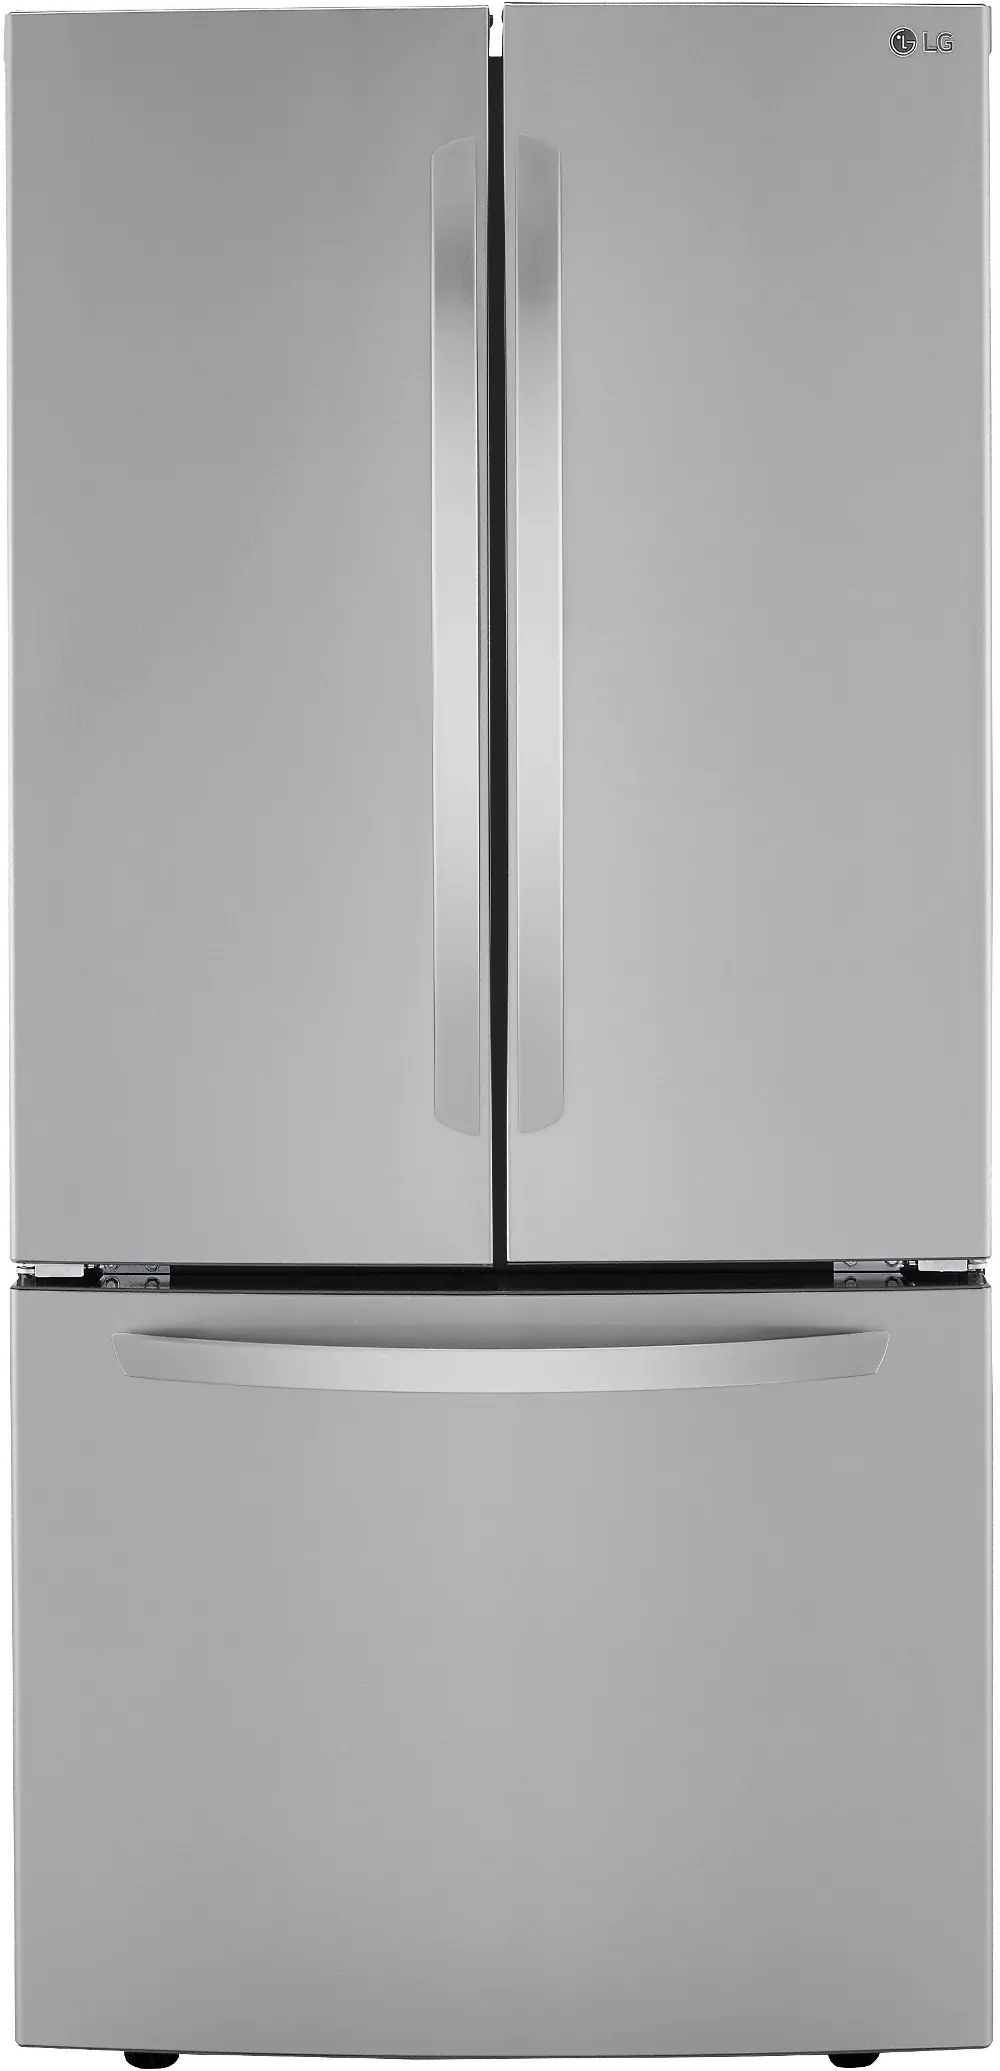 LRFCS2503S LG 25.2 cu ft French Door Refrigerator - 33 W Stainless Steel-1